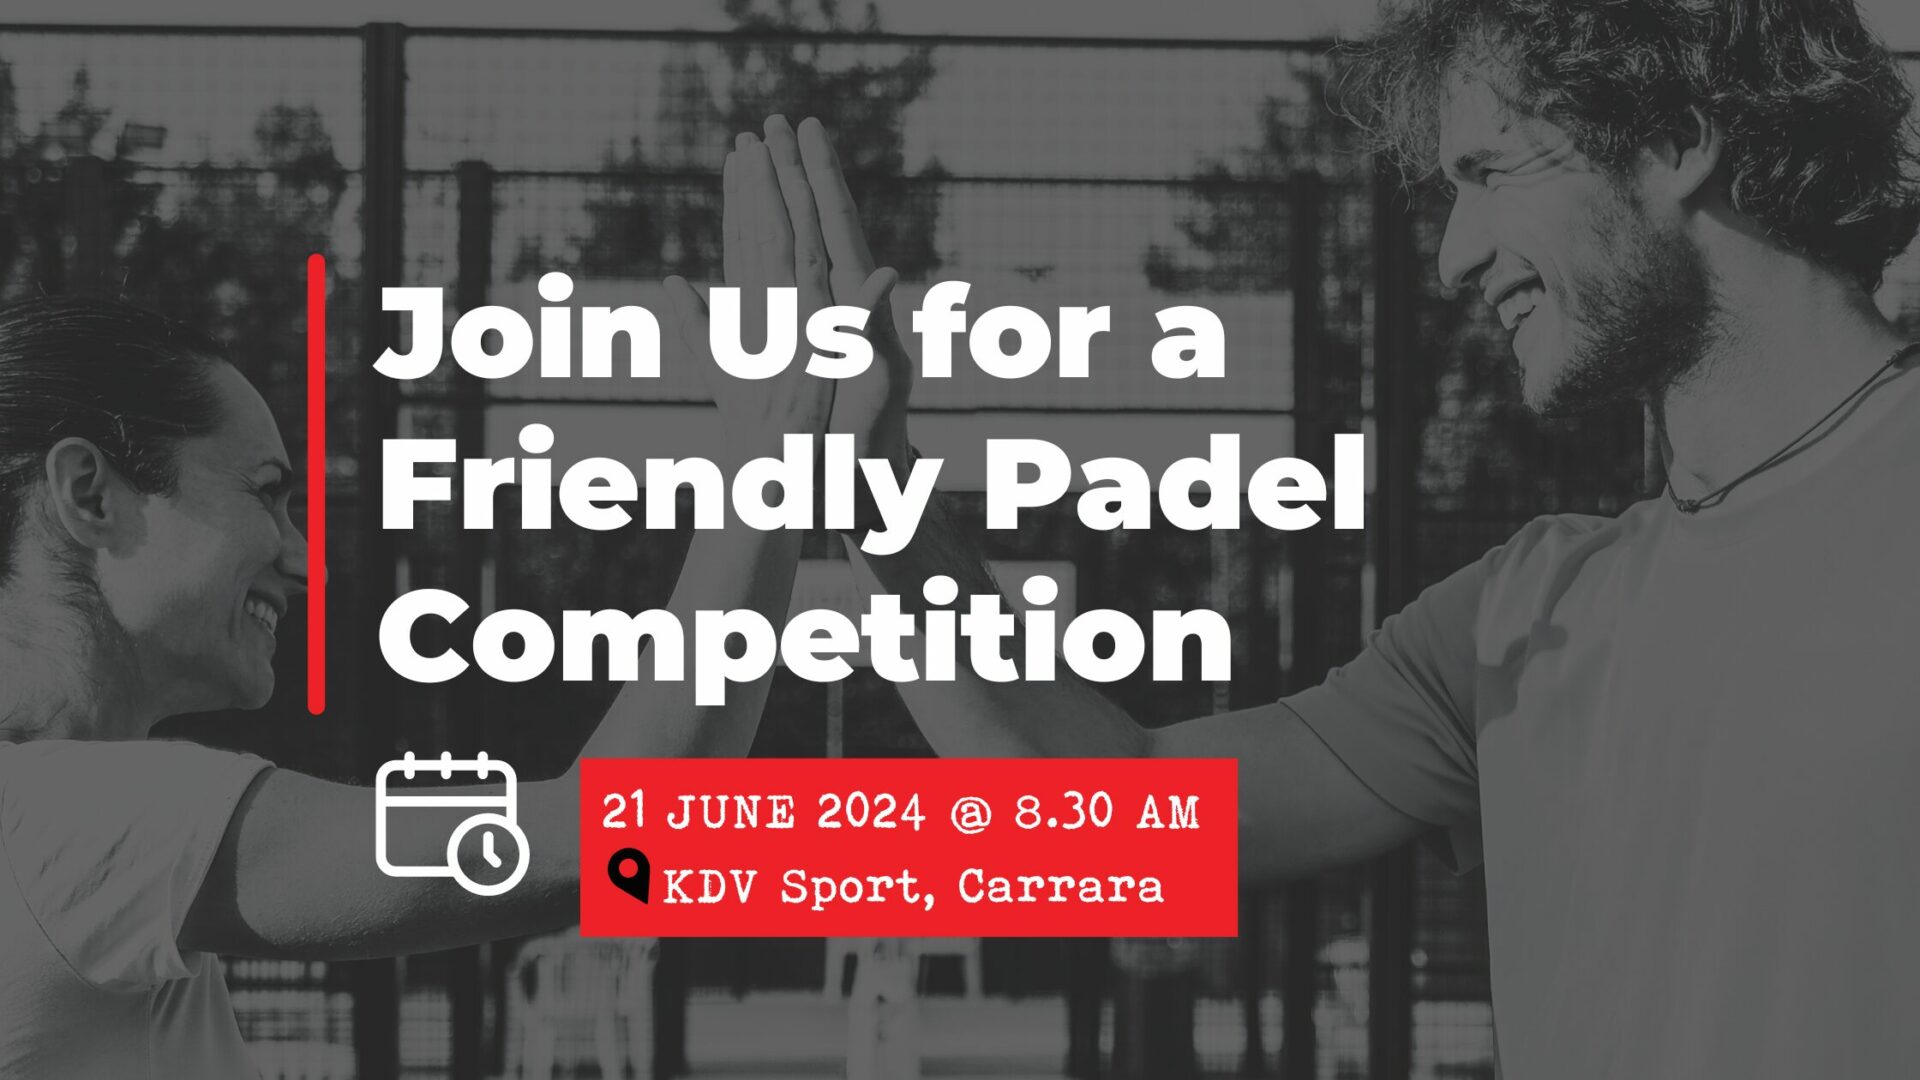 21 June 2024: Join Us For a Friendly Padel Competition